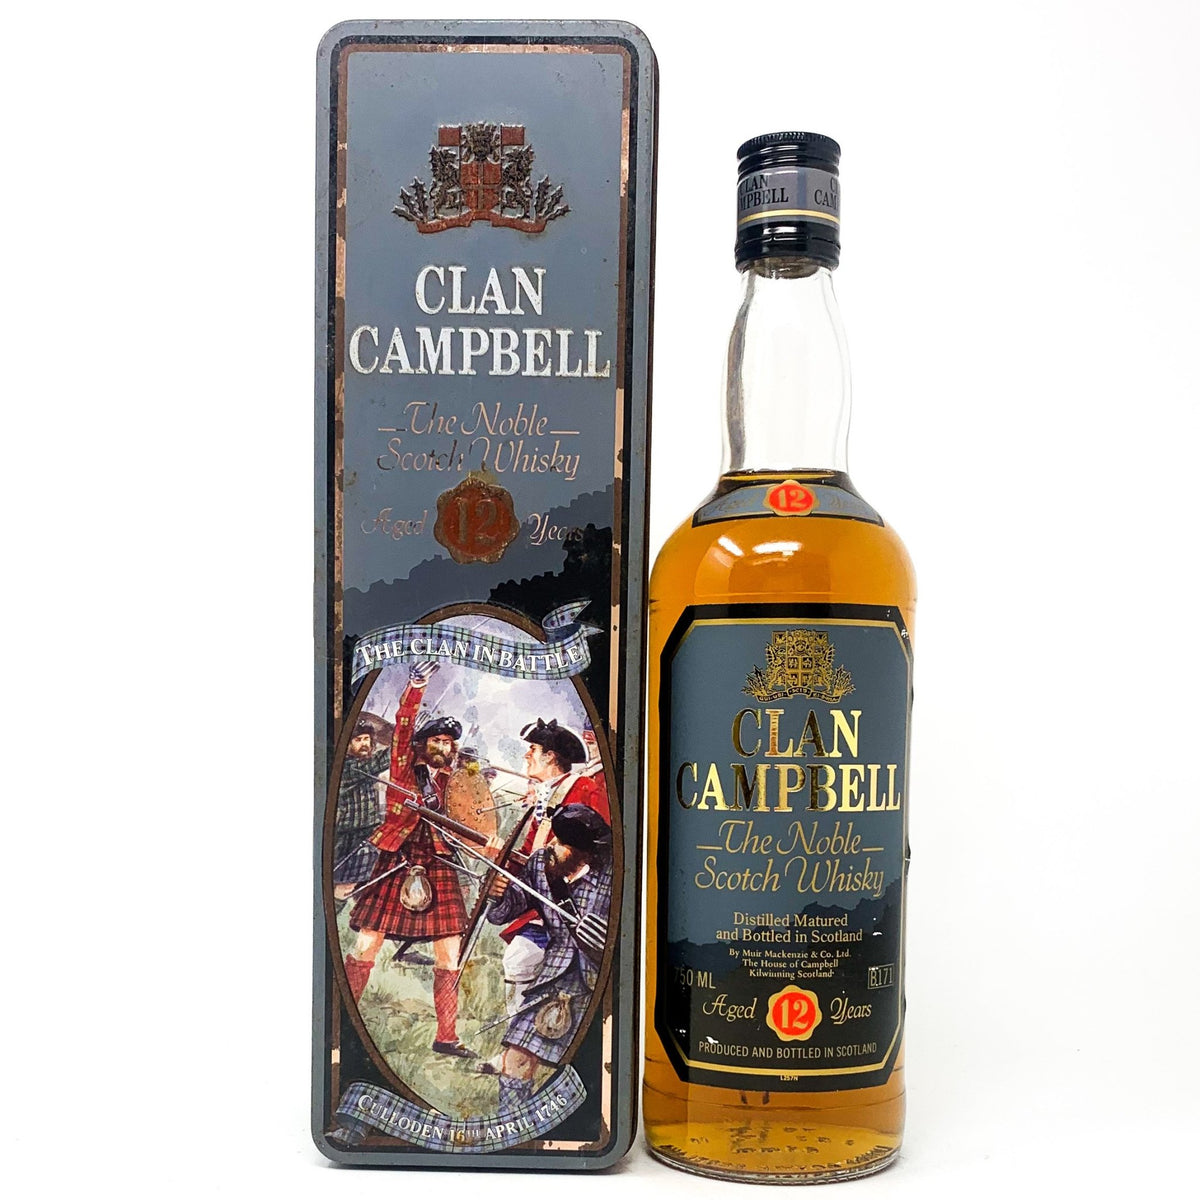 Clan Campbell 12 Year Old Scotch Whisky, 75cl, 40% ABV — Old and Rare Whisky